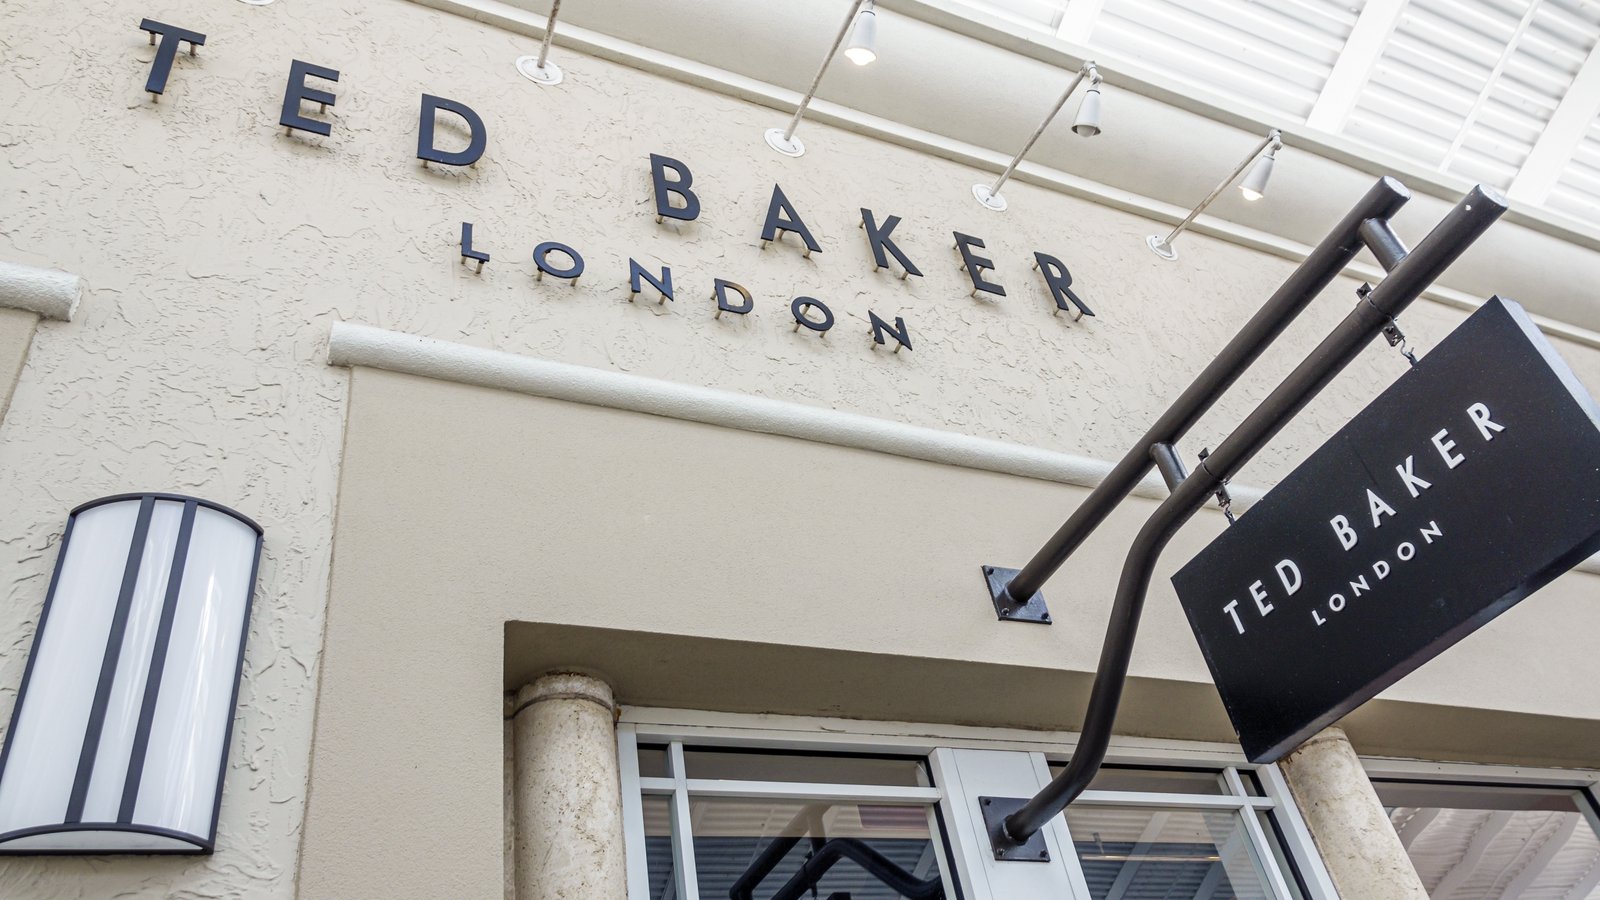 Ted Baker puts itself up for sale